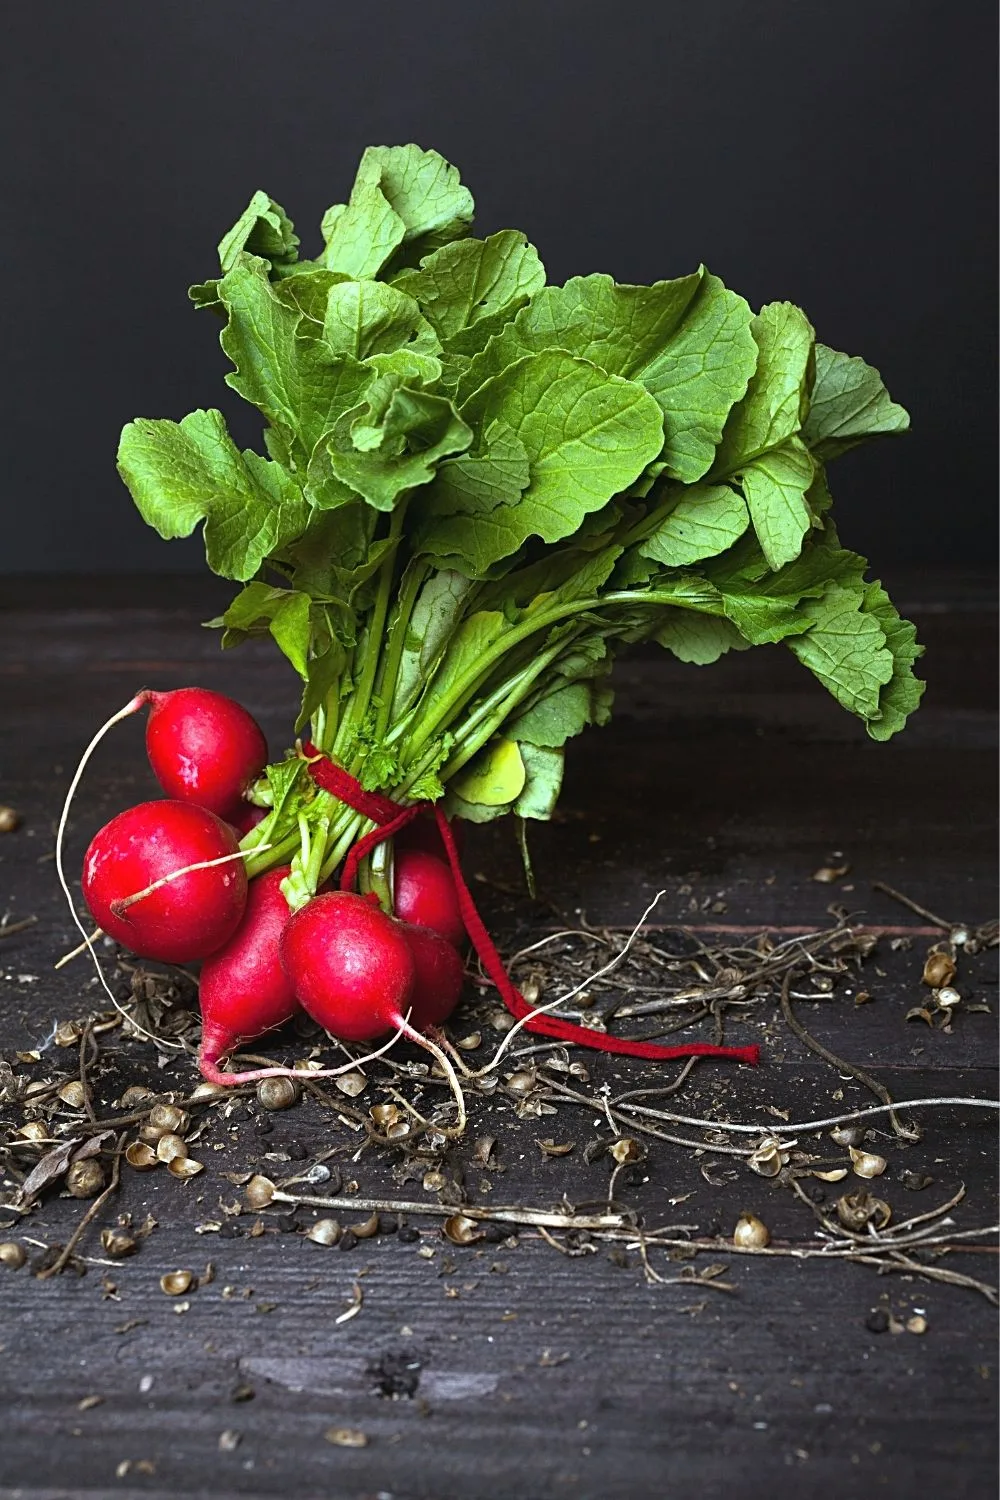 Though Radishes thrive in raised beds, don't expose them to full sunlight for long hours